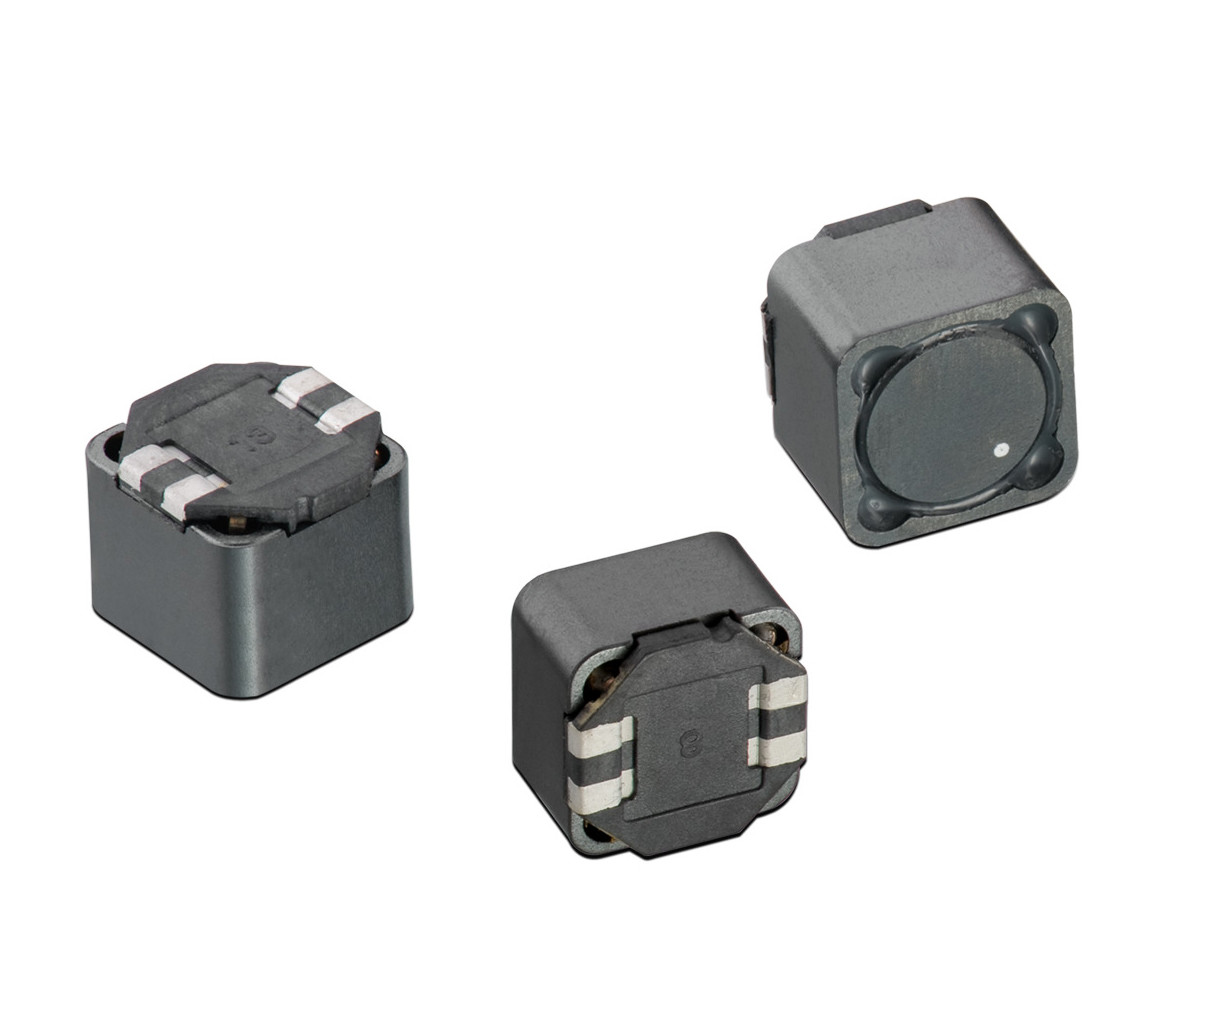  PDRH125D Series 1.5uH~100uH Square High quality competitive shielded SMD Power Inductors Replace Wurth744874 series Manufactures